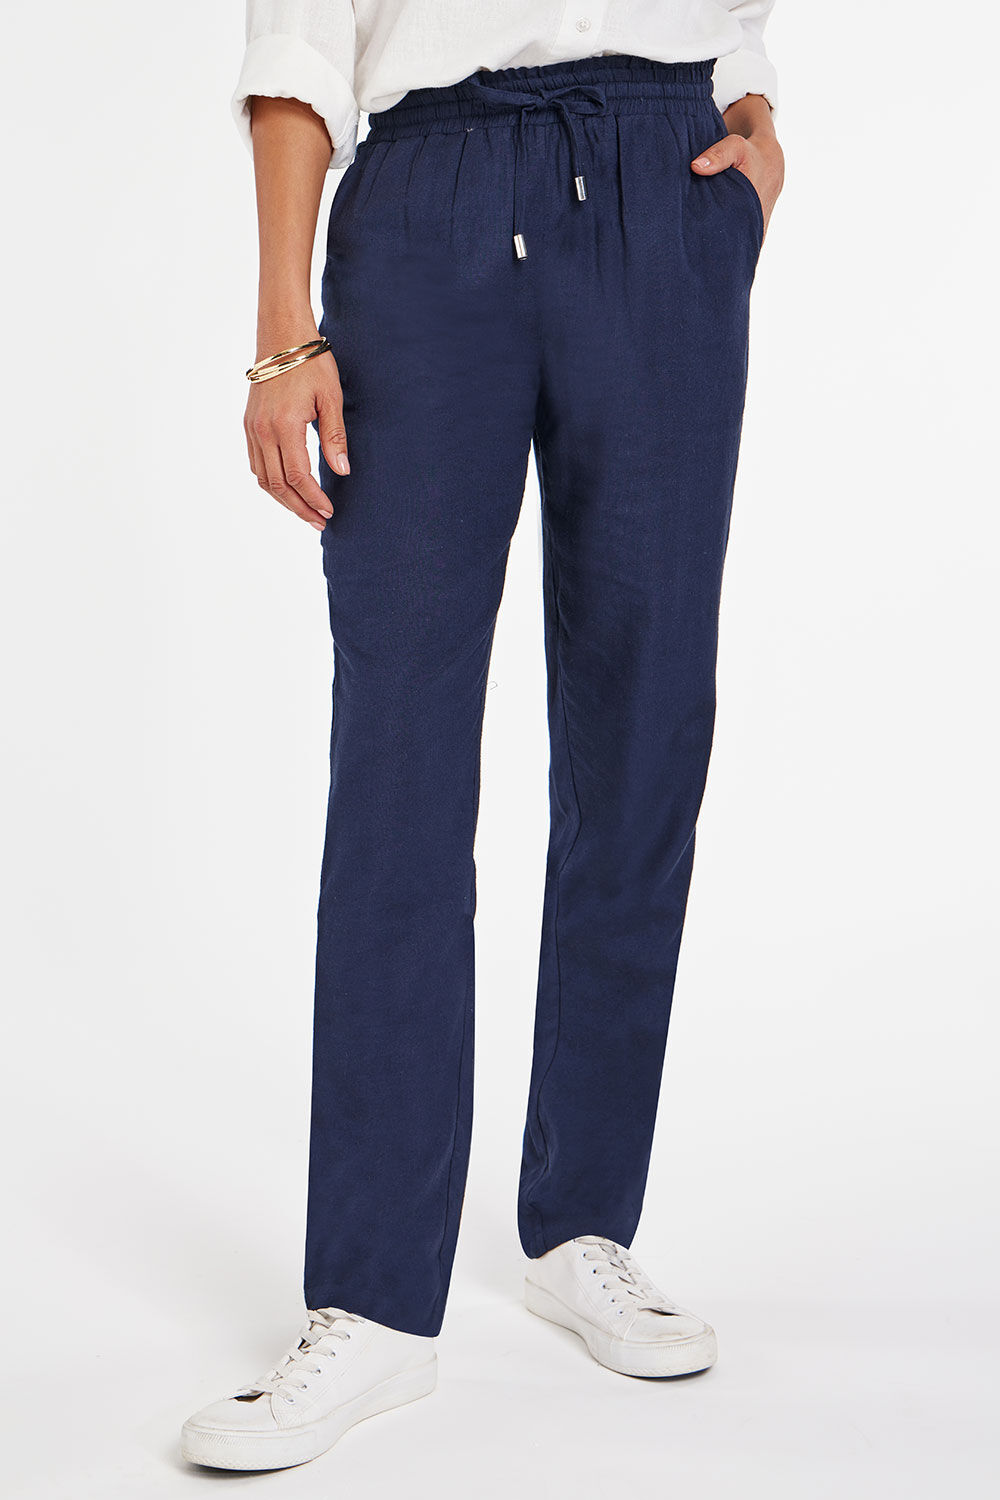 Bonmarche Navy Paperbag Tie Waist Tapered Linen Trousers, Size: 18